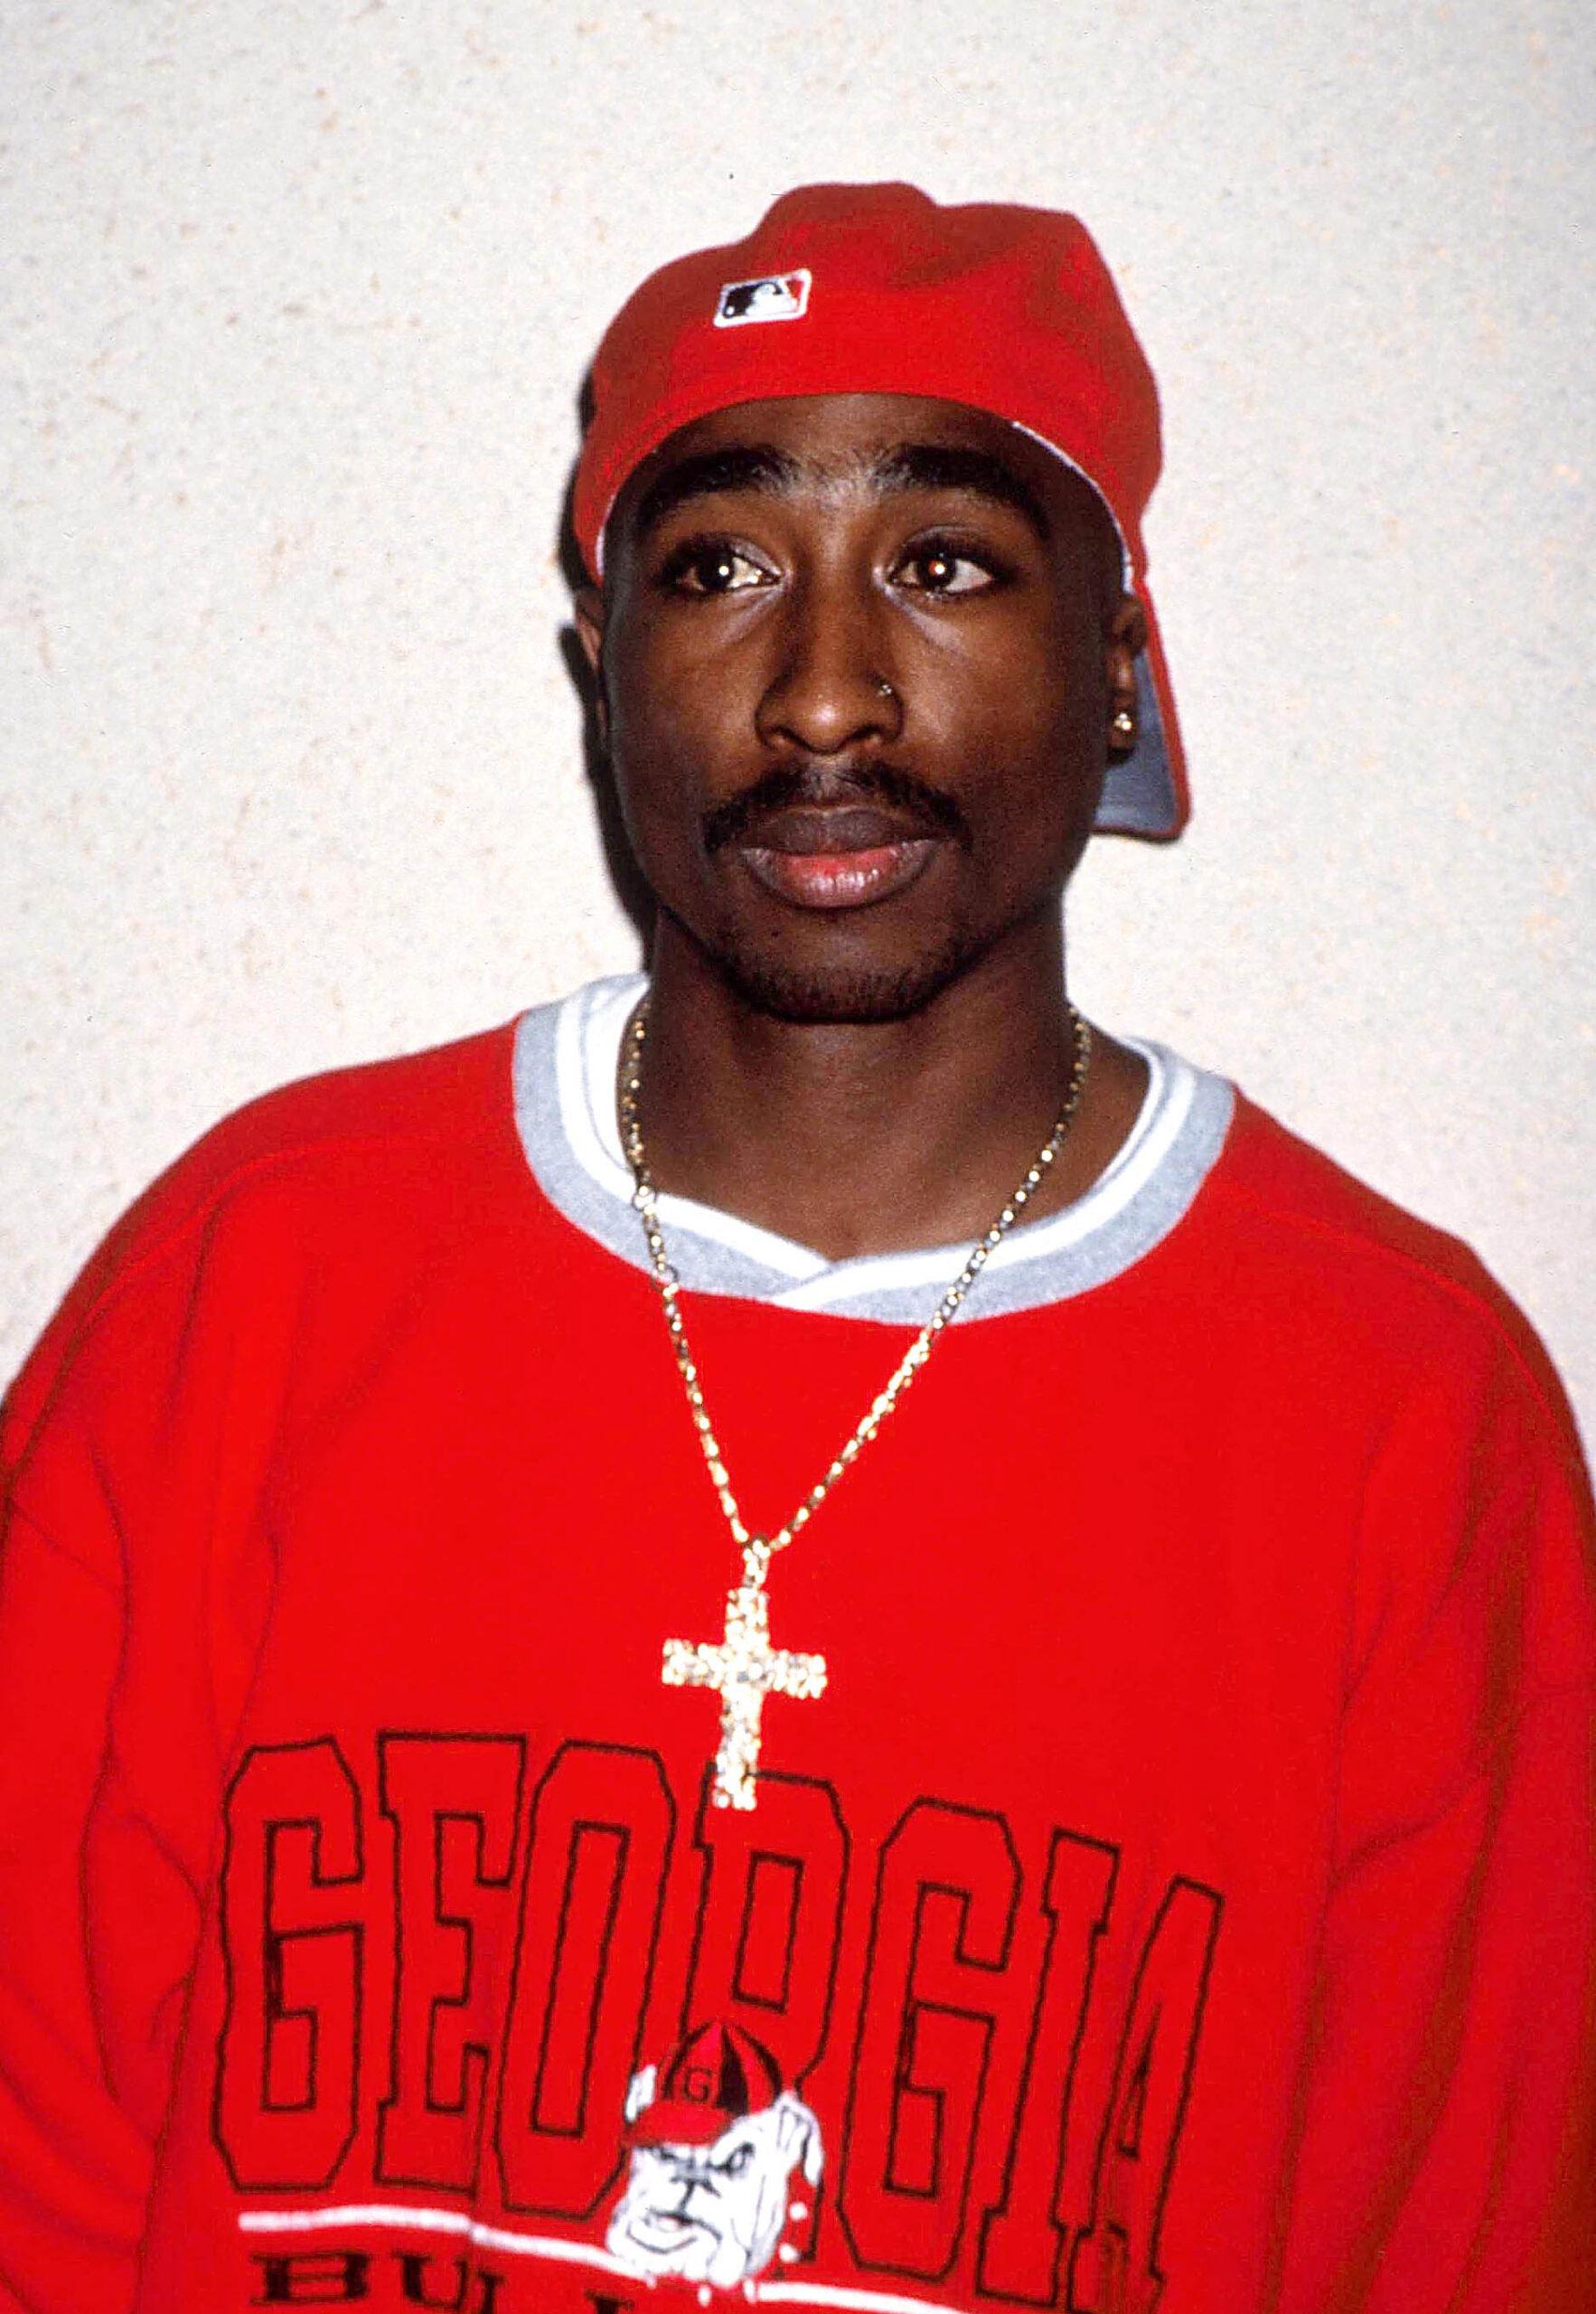 TUPAC SHAKUR wearing jewelry gold and Georgia 'Bloods' gangster color red sweater. 03 Jun 2003